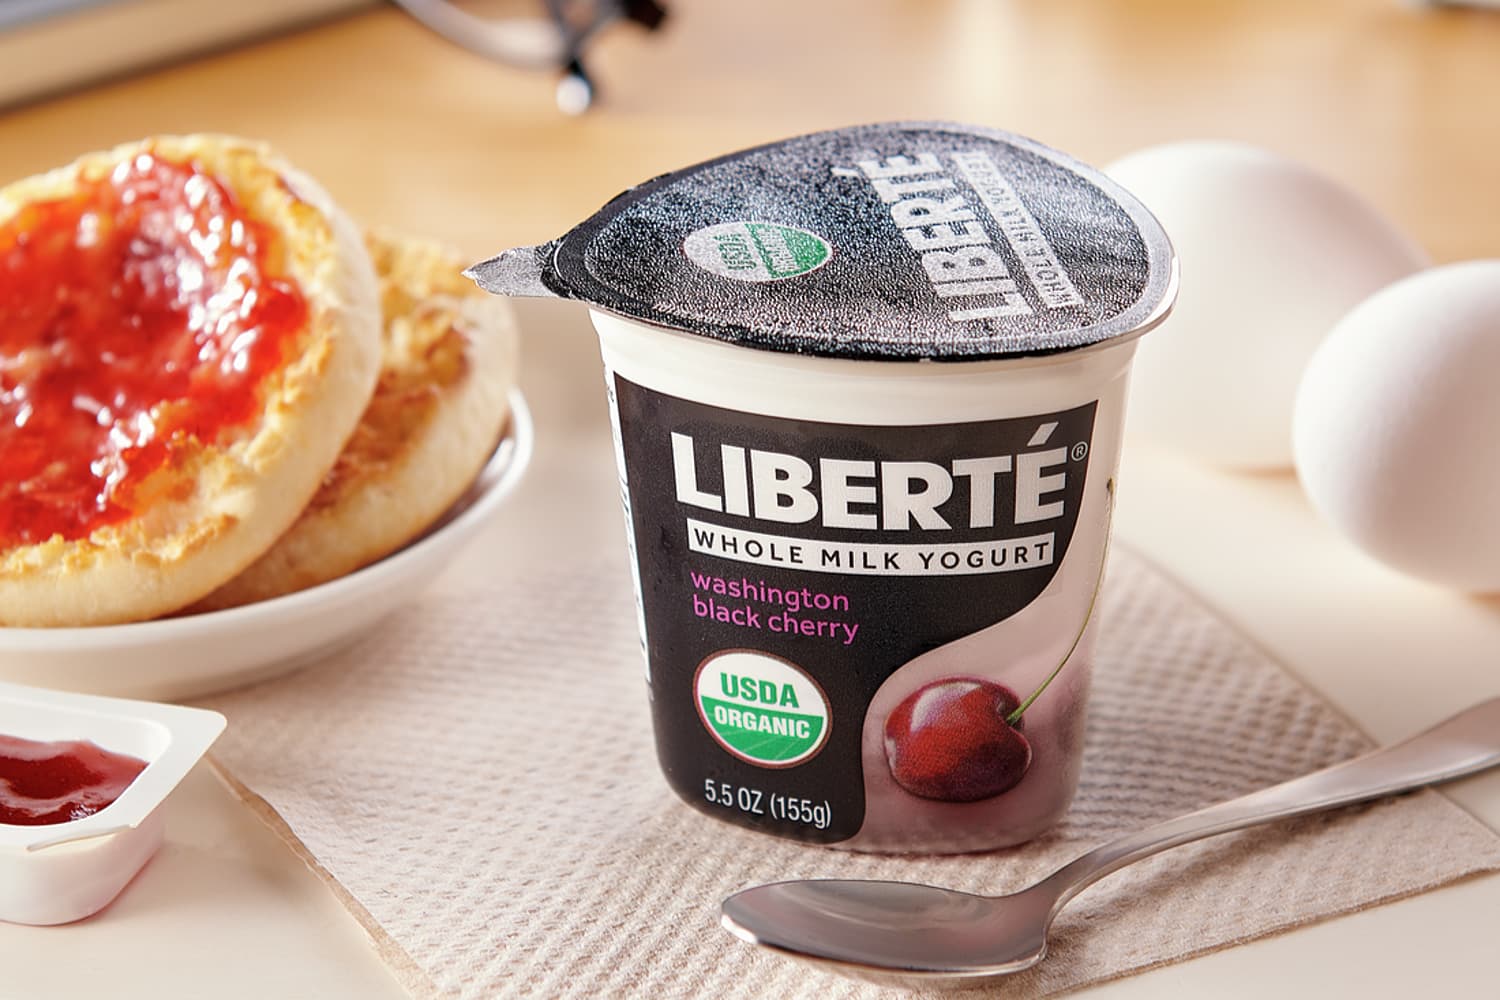 A package of Liberte yogurt surrounded by toast, eggs and jam